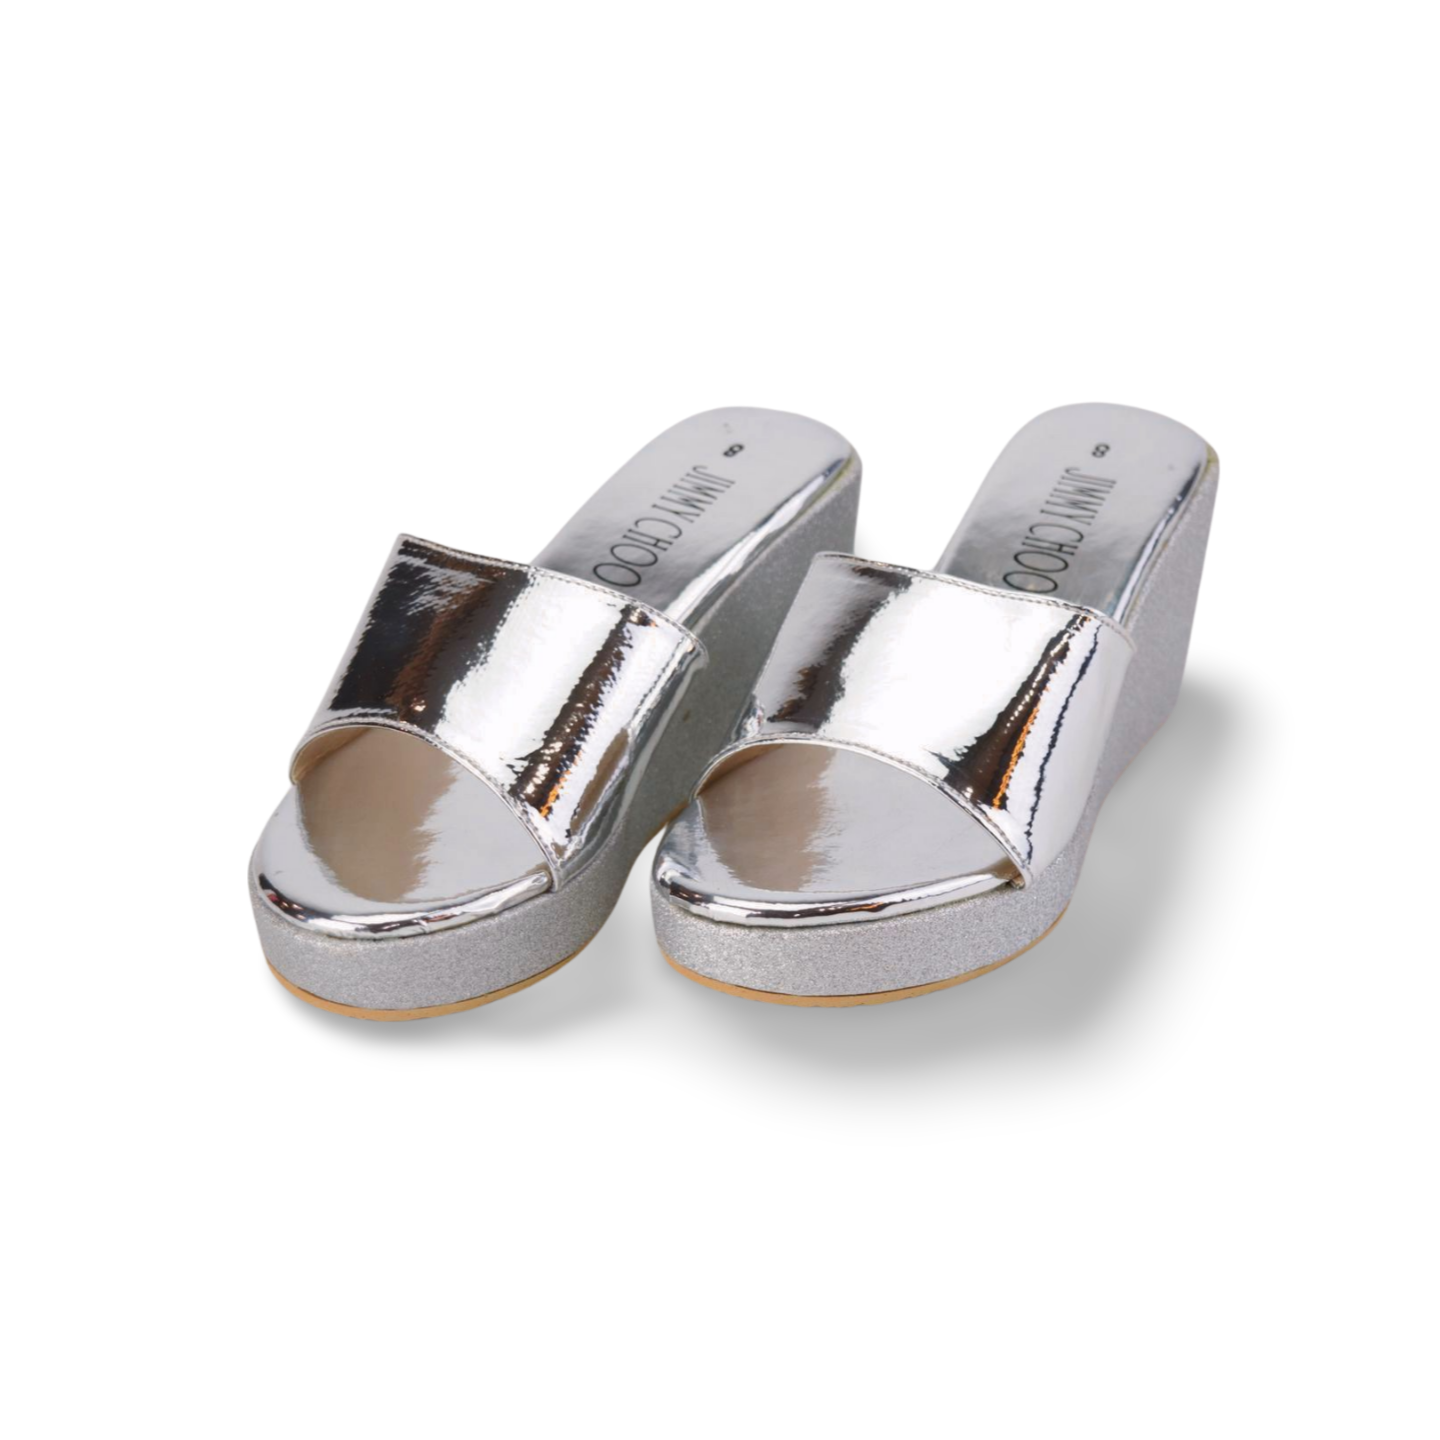 Shiny Wedge Sandals for Women - Stylish and Comfortable Shoes for Any Occasion